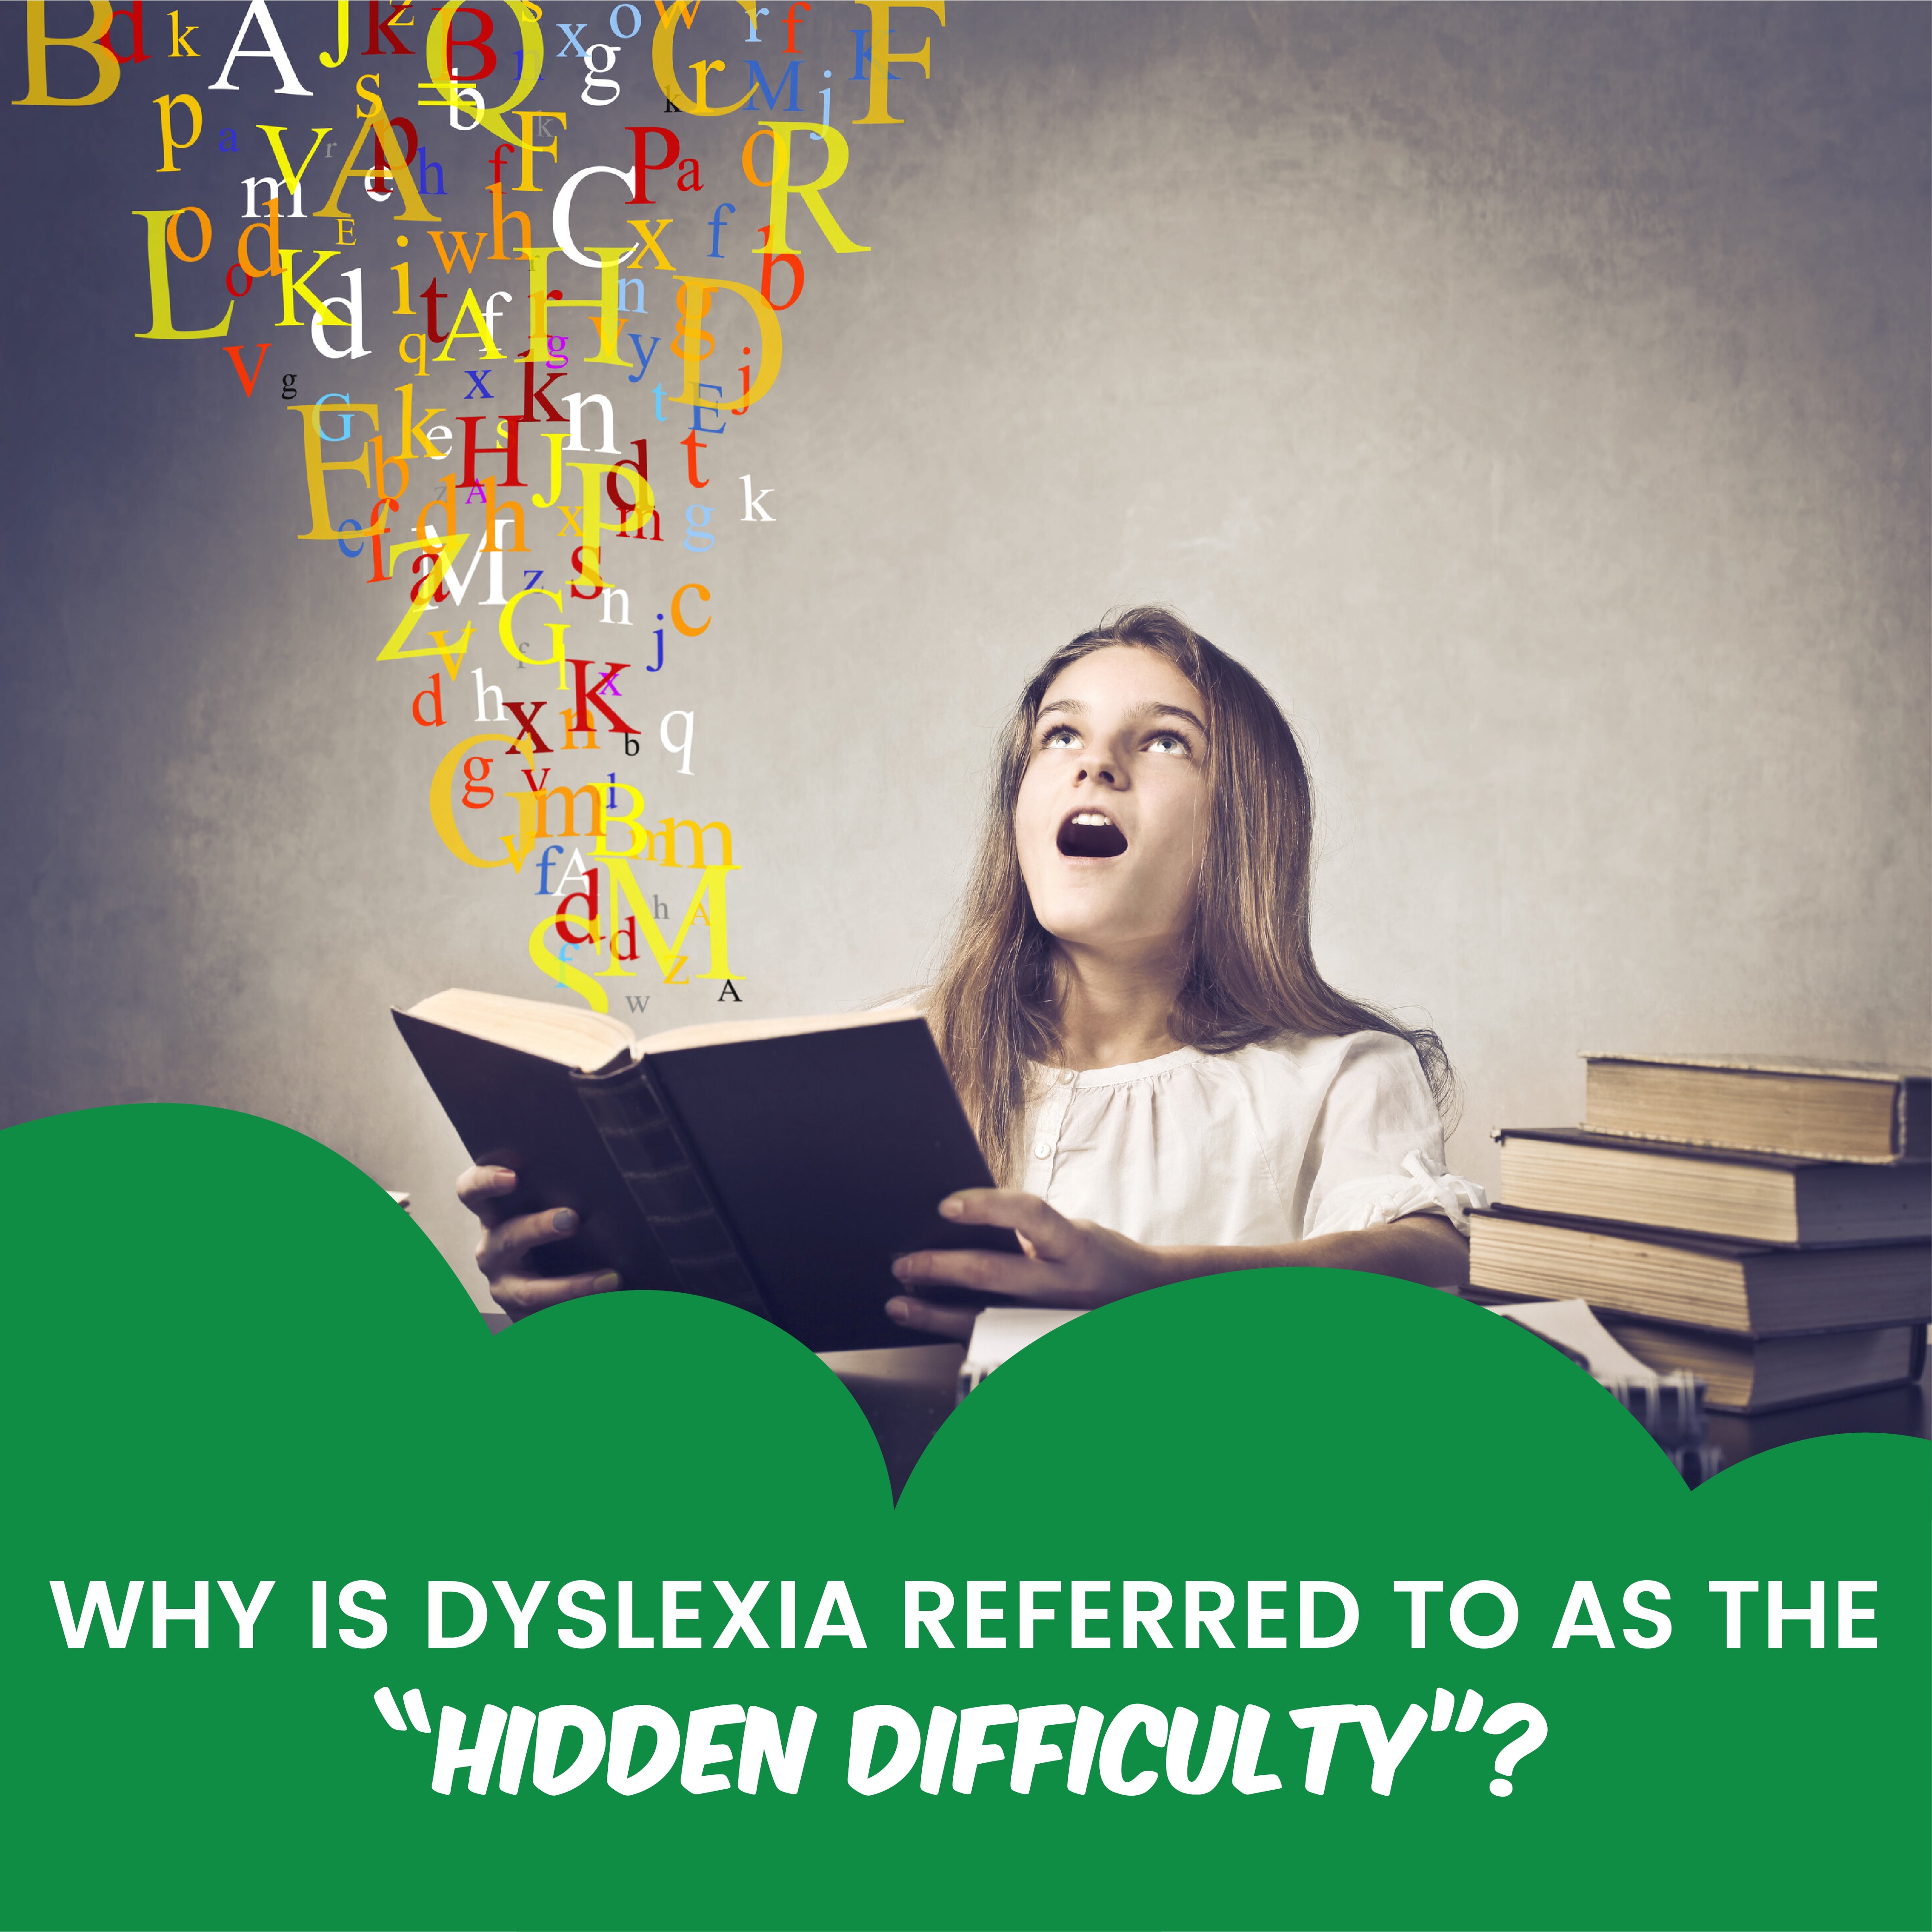 Why is dyslexia referred to as the "hidden difficulty"?